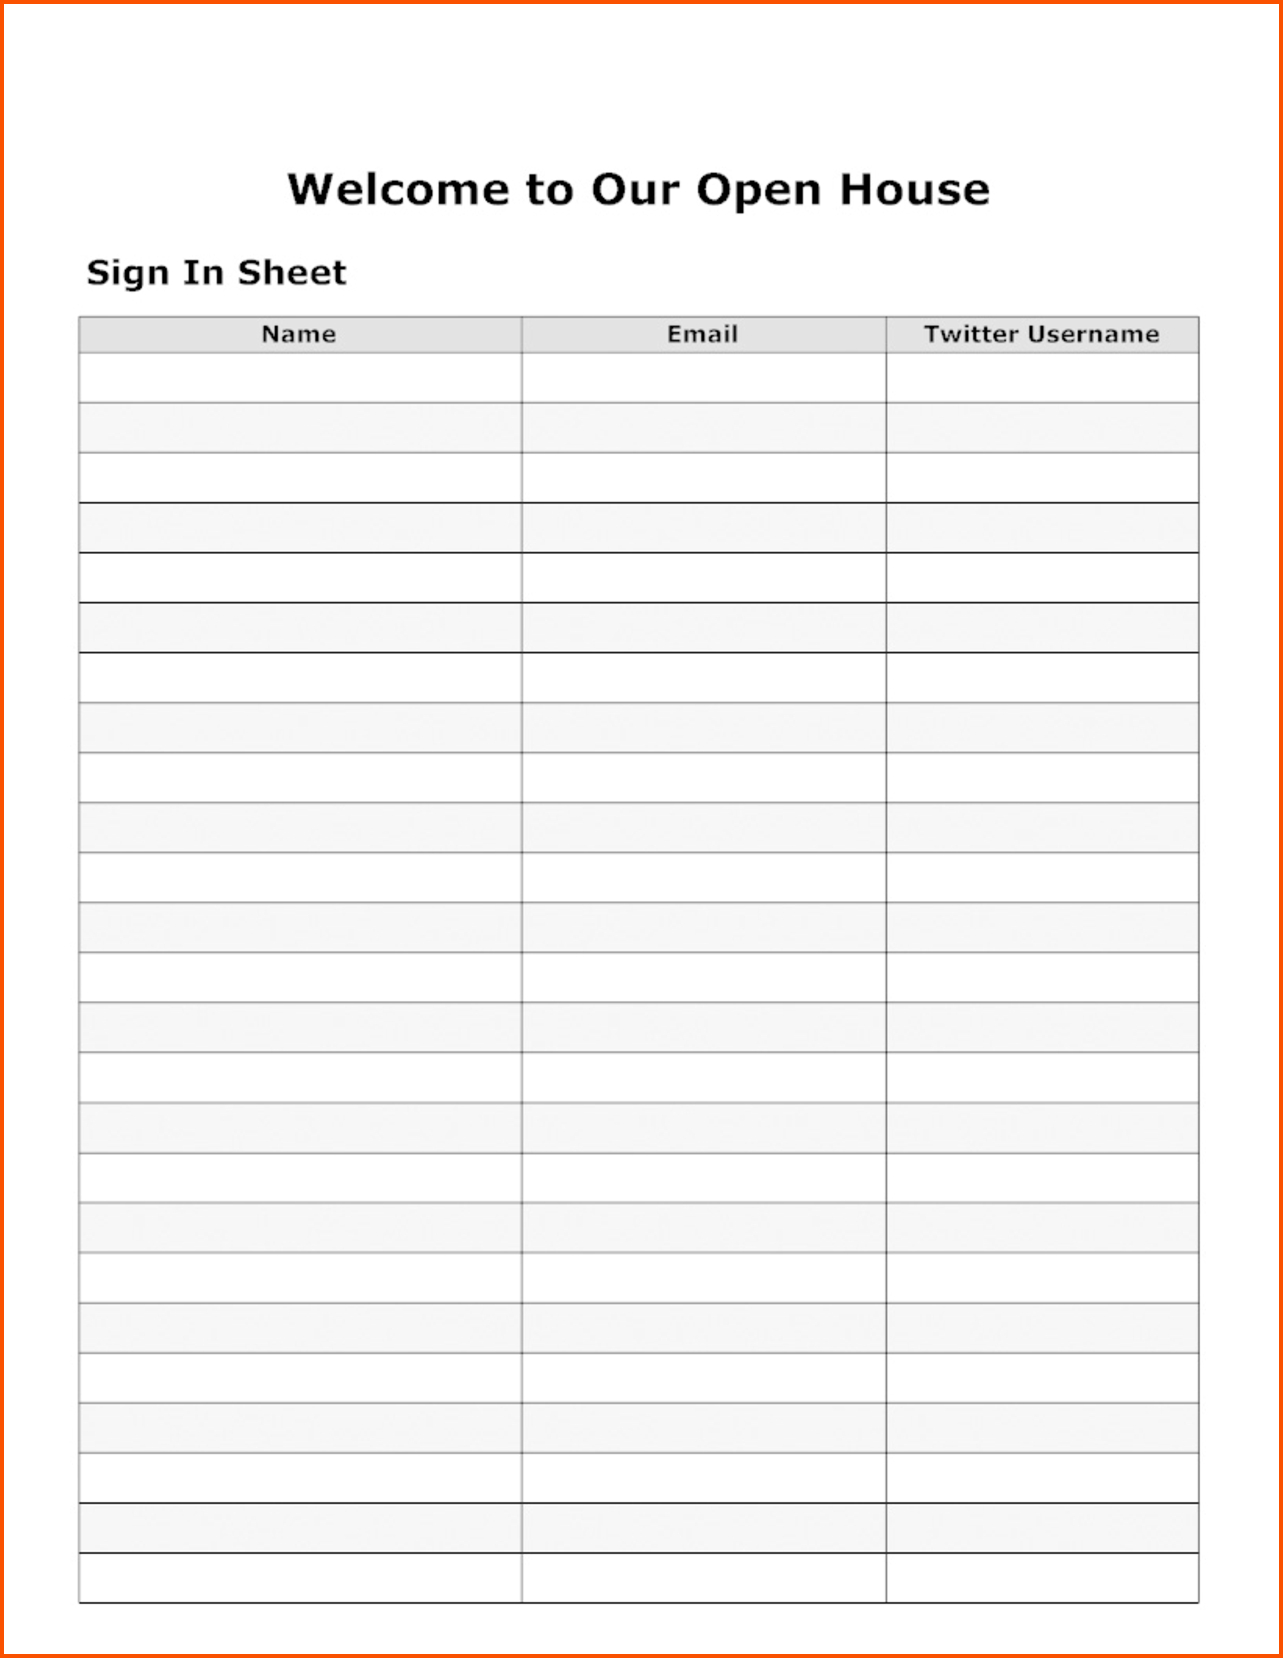 008 Sign In Sheet Template Free Ideas Dreaded Visitor Word